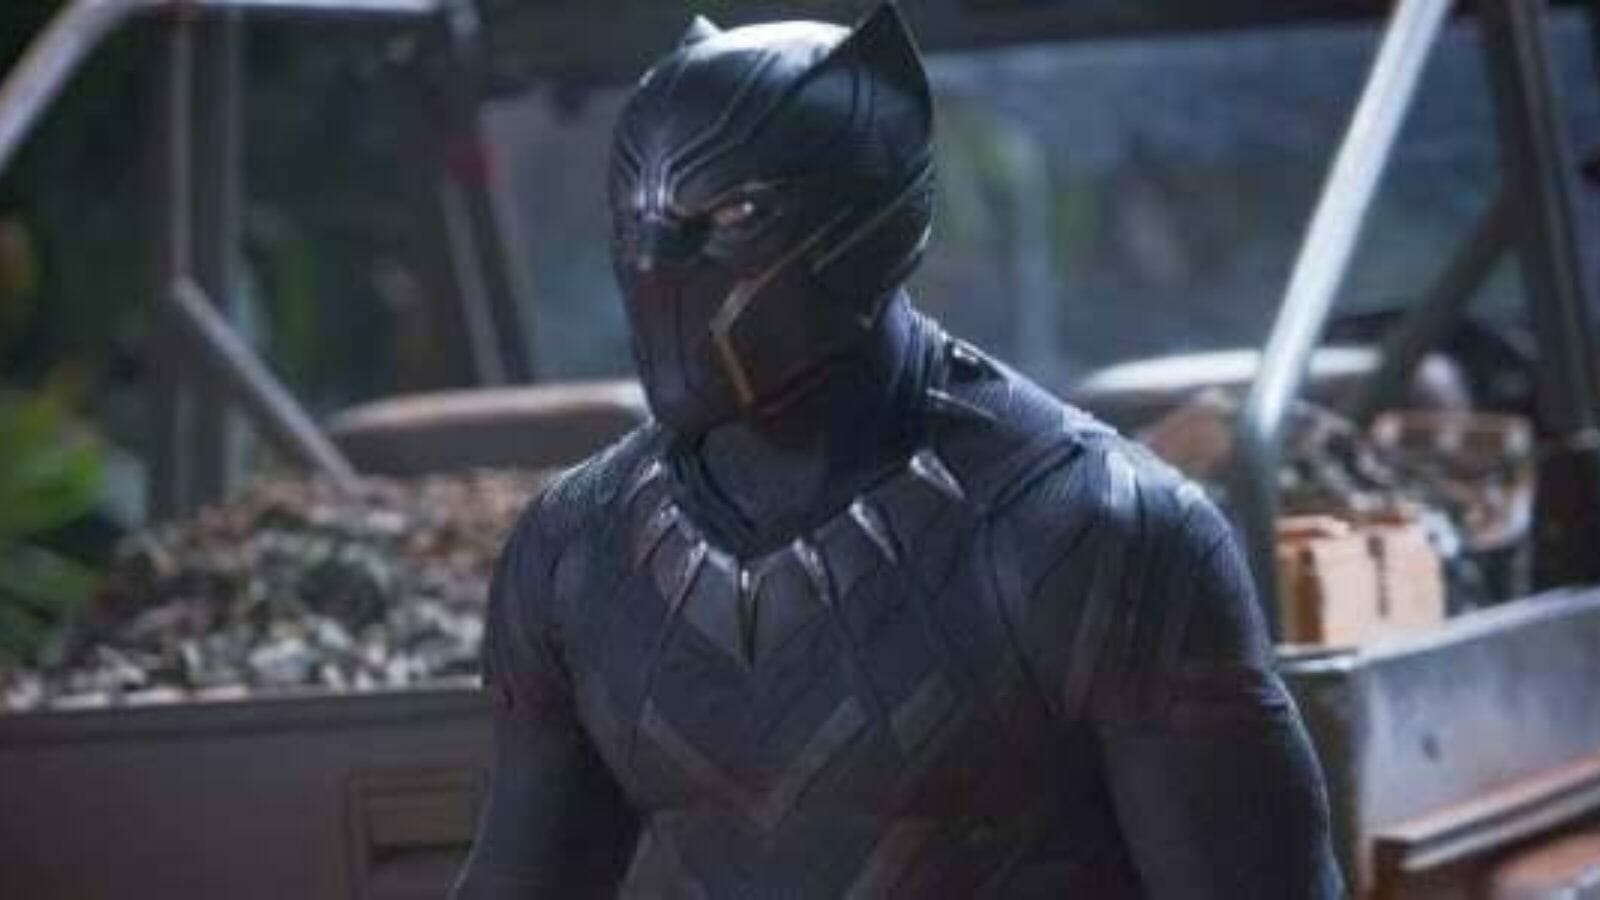 A snippet from Black Panther